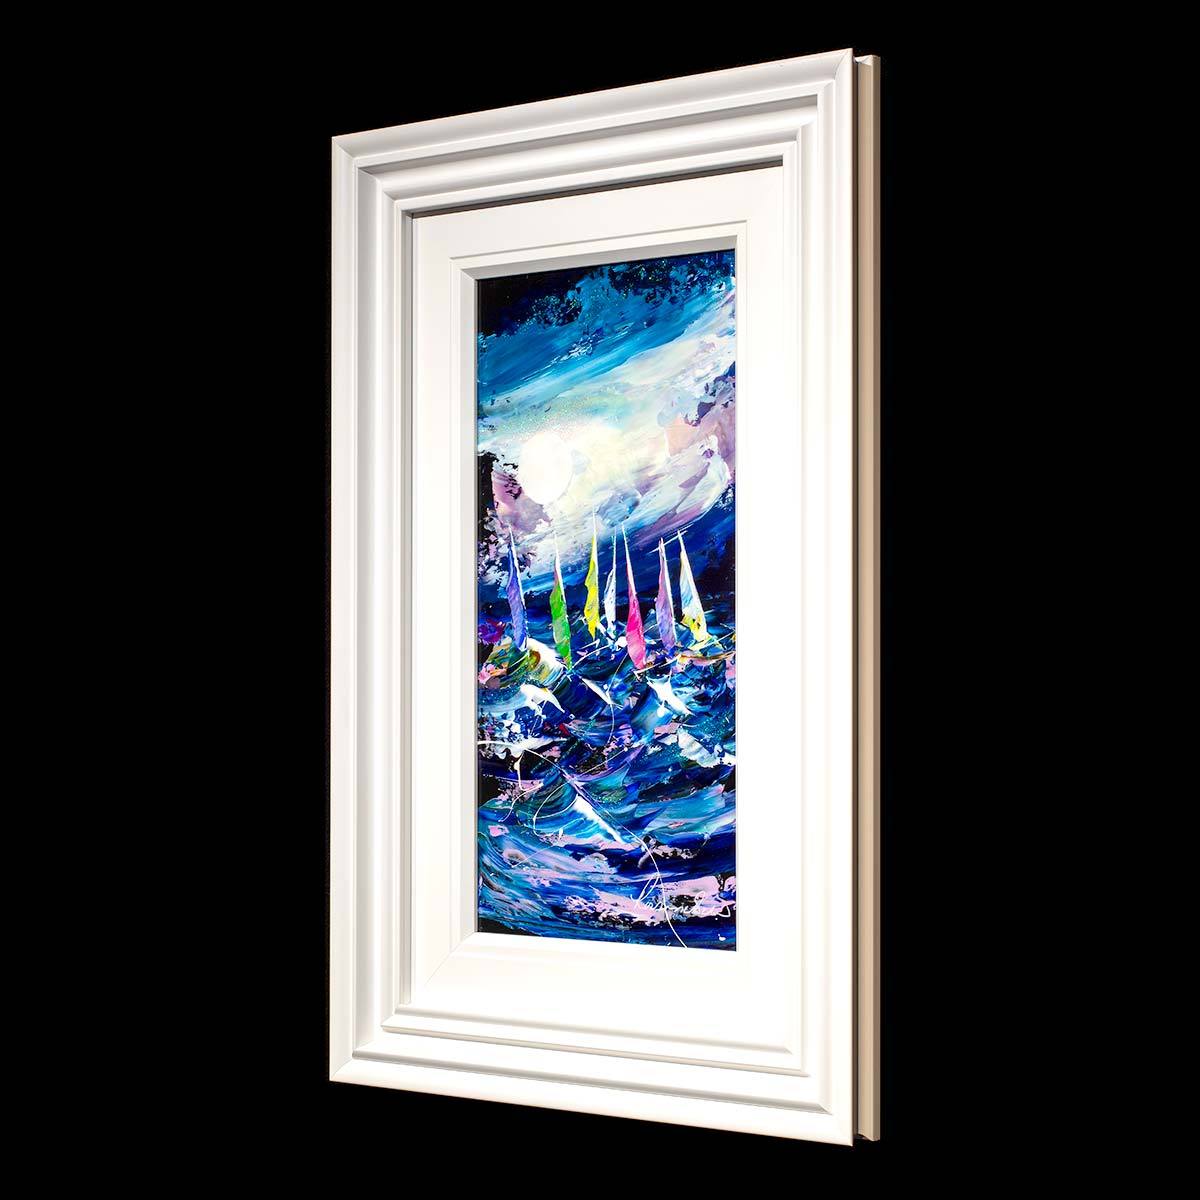 Racing at Night I - Original Rozanne Bell Framed